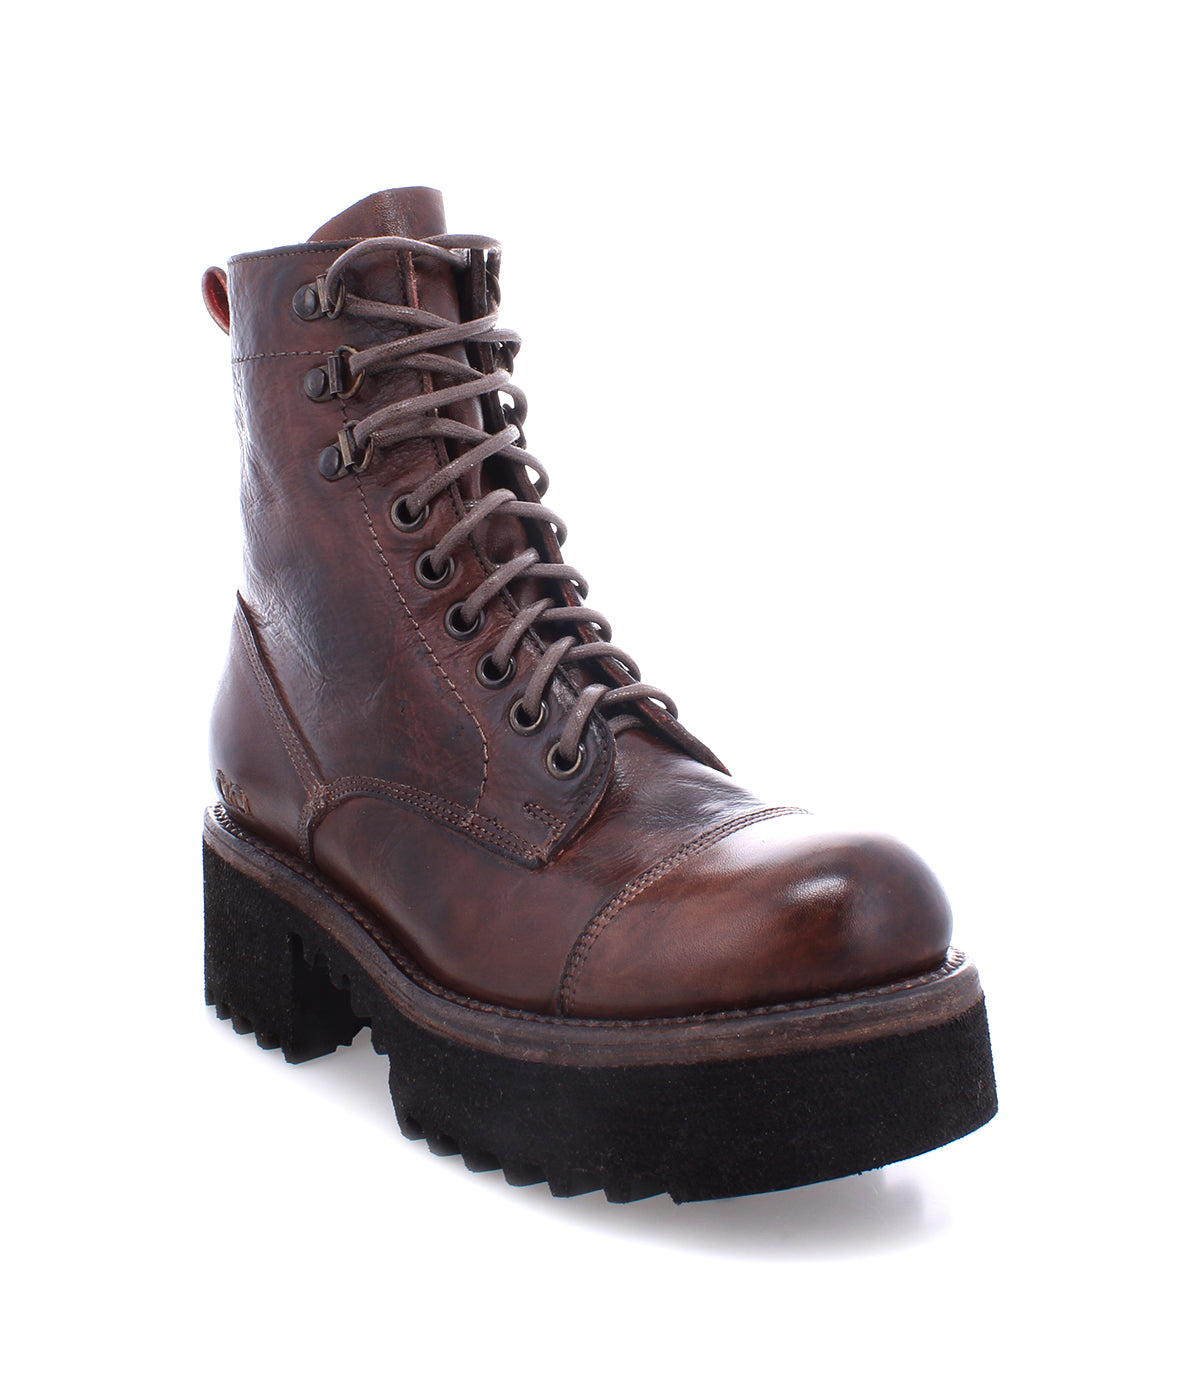 A men's Prudence Hi combat boot with a black outsole by Bed Stu.